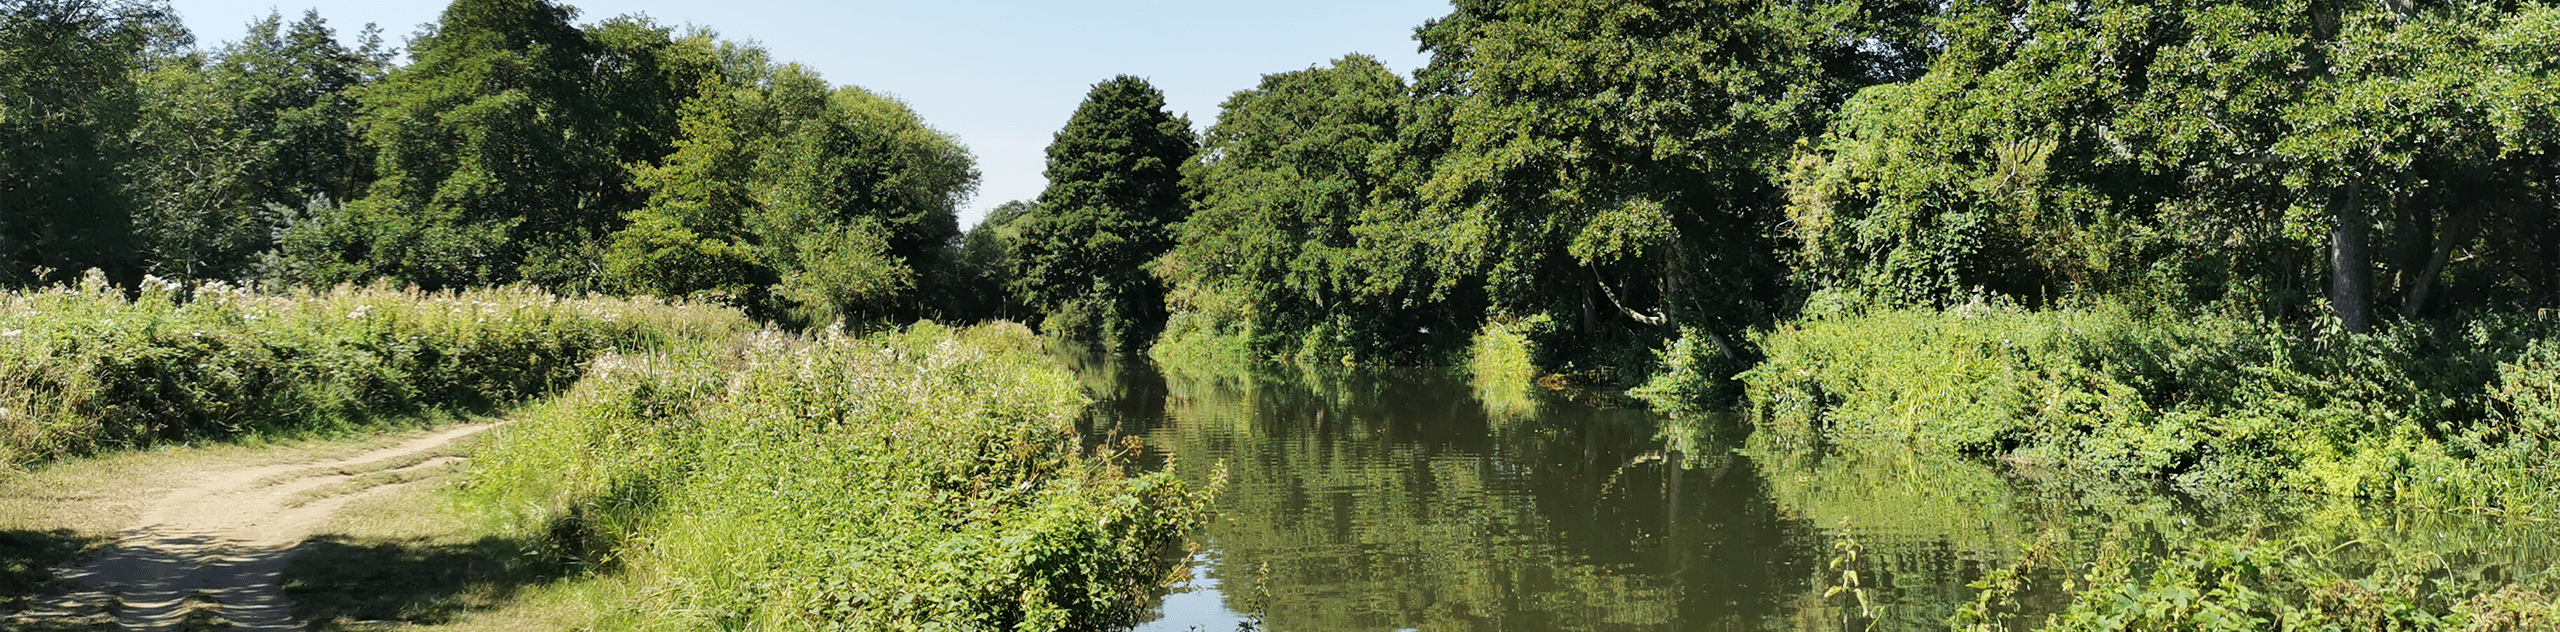 A photograph of the public footpath and existing vegetation along the river Wey. © BMD